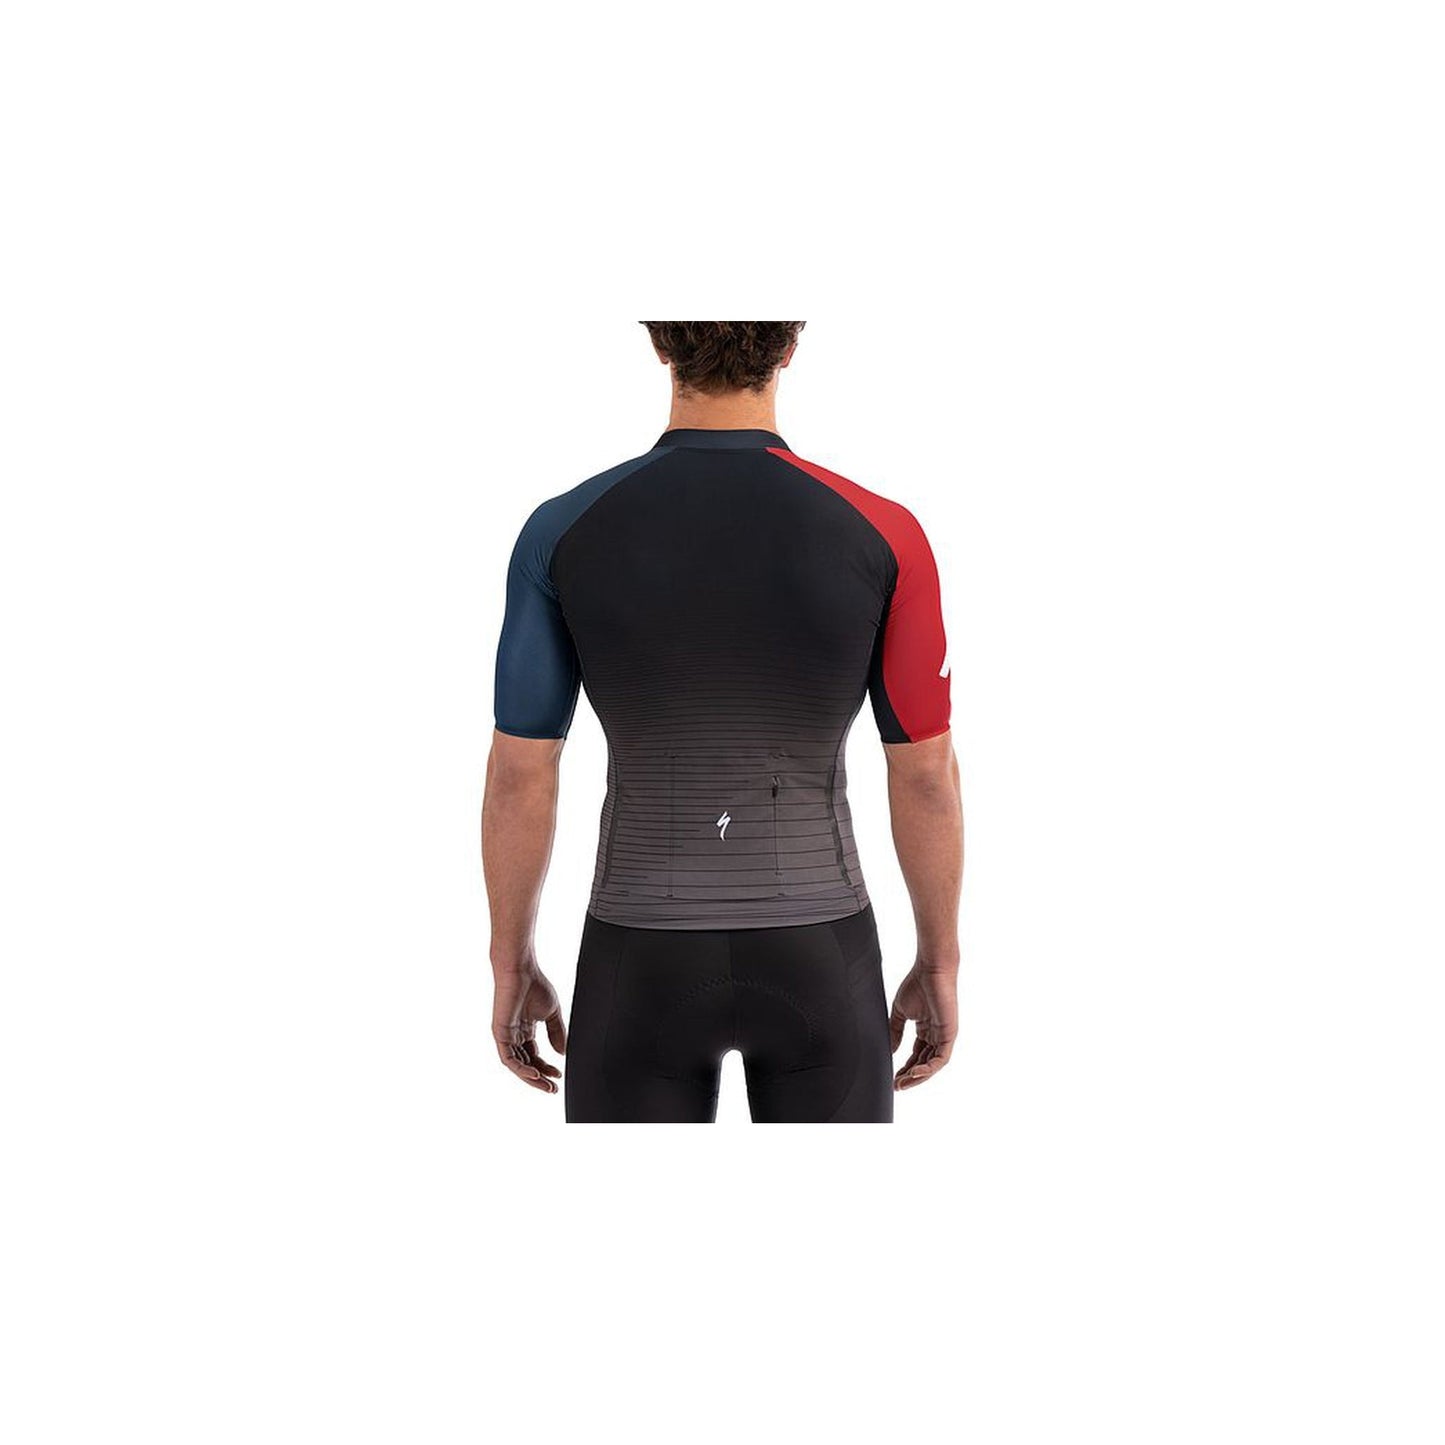 Men's SL Race Jersey-Cycles Direct Specialized